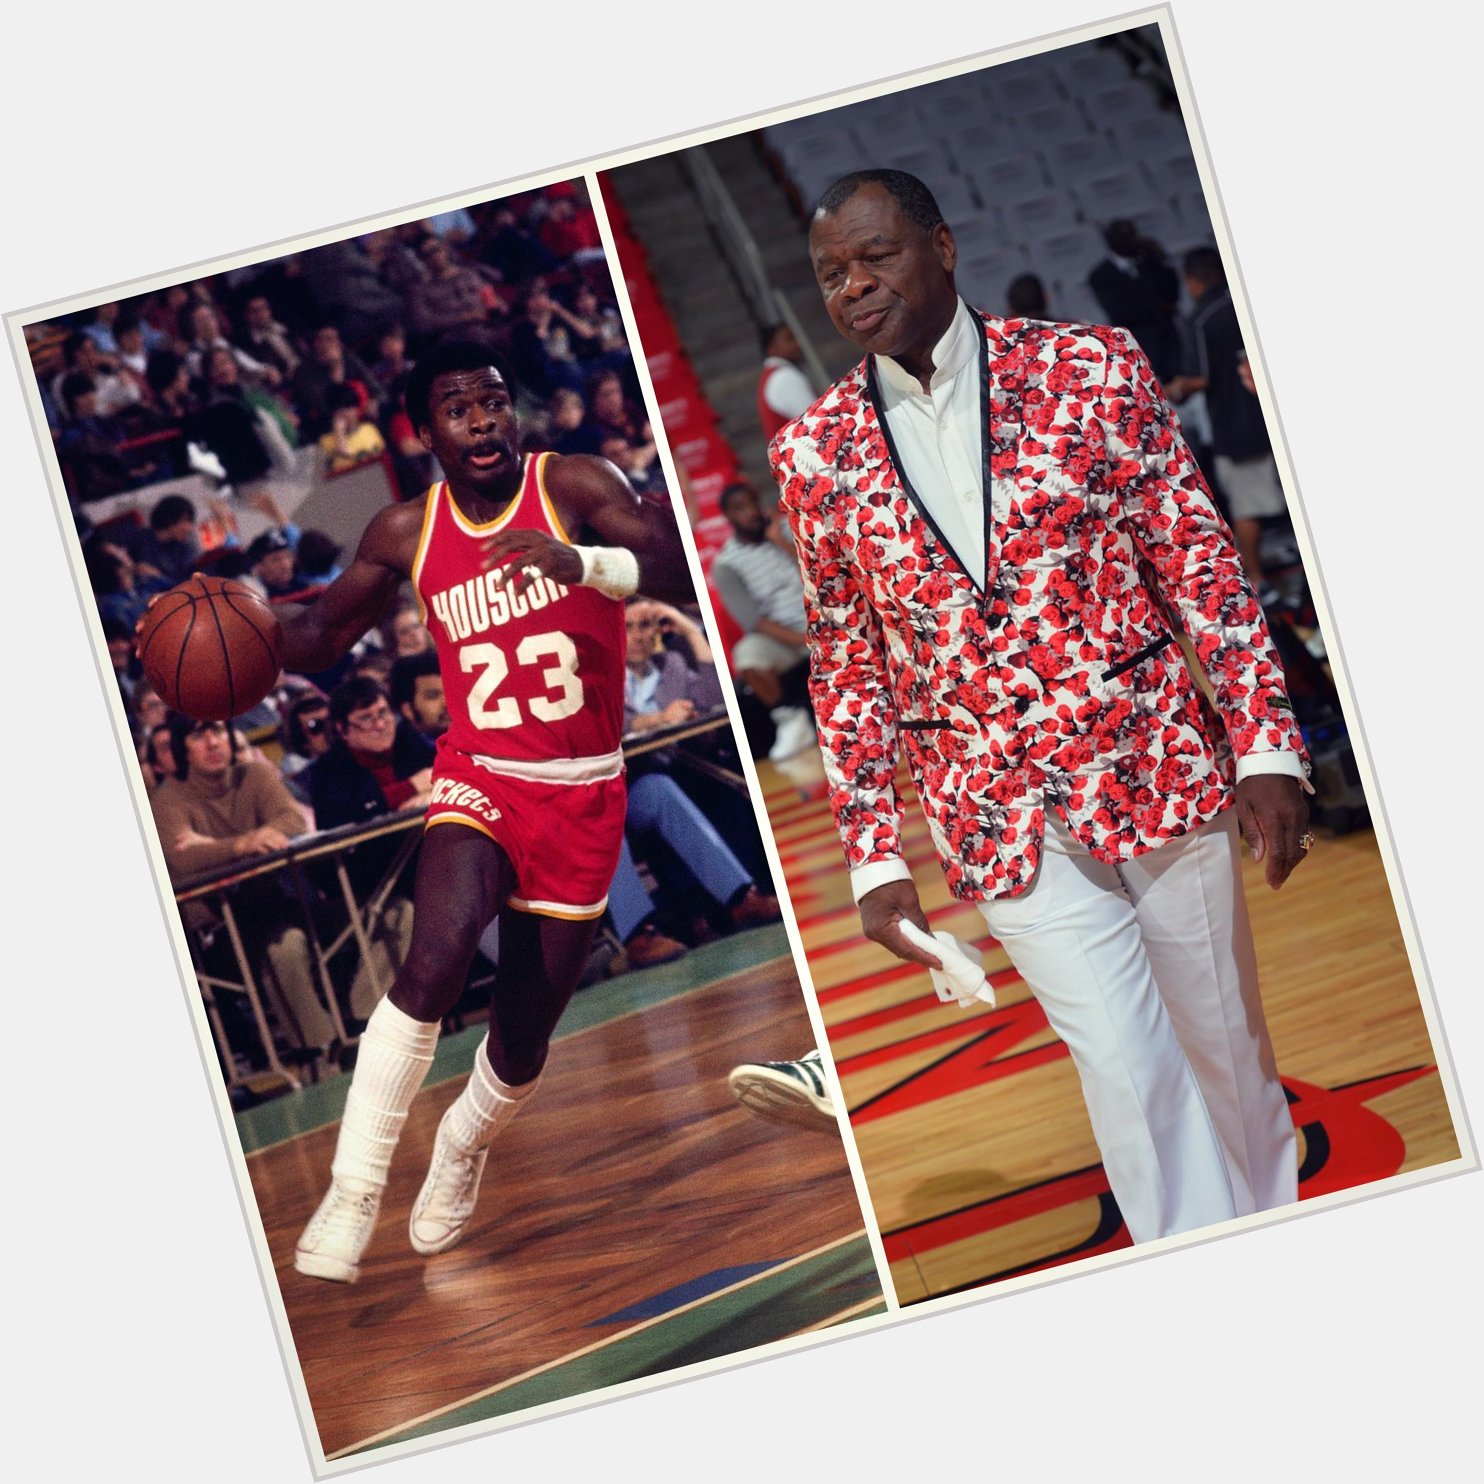 Join us in wishing Hall of Famer Calvin Murphy a Happy Birthday! 